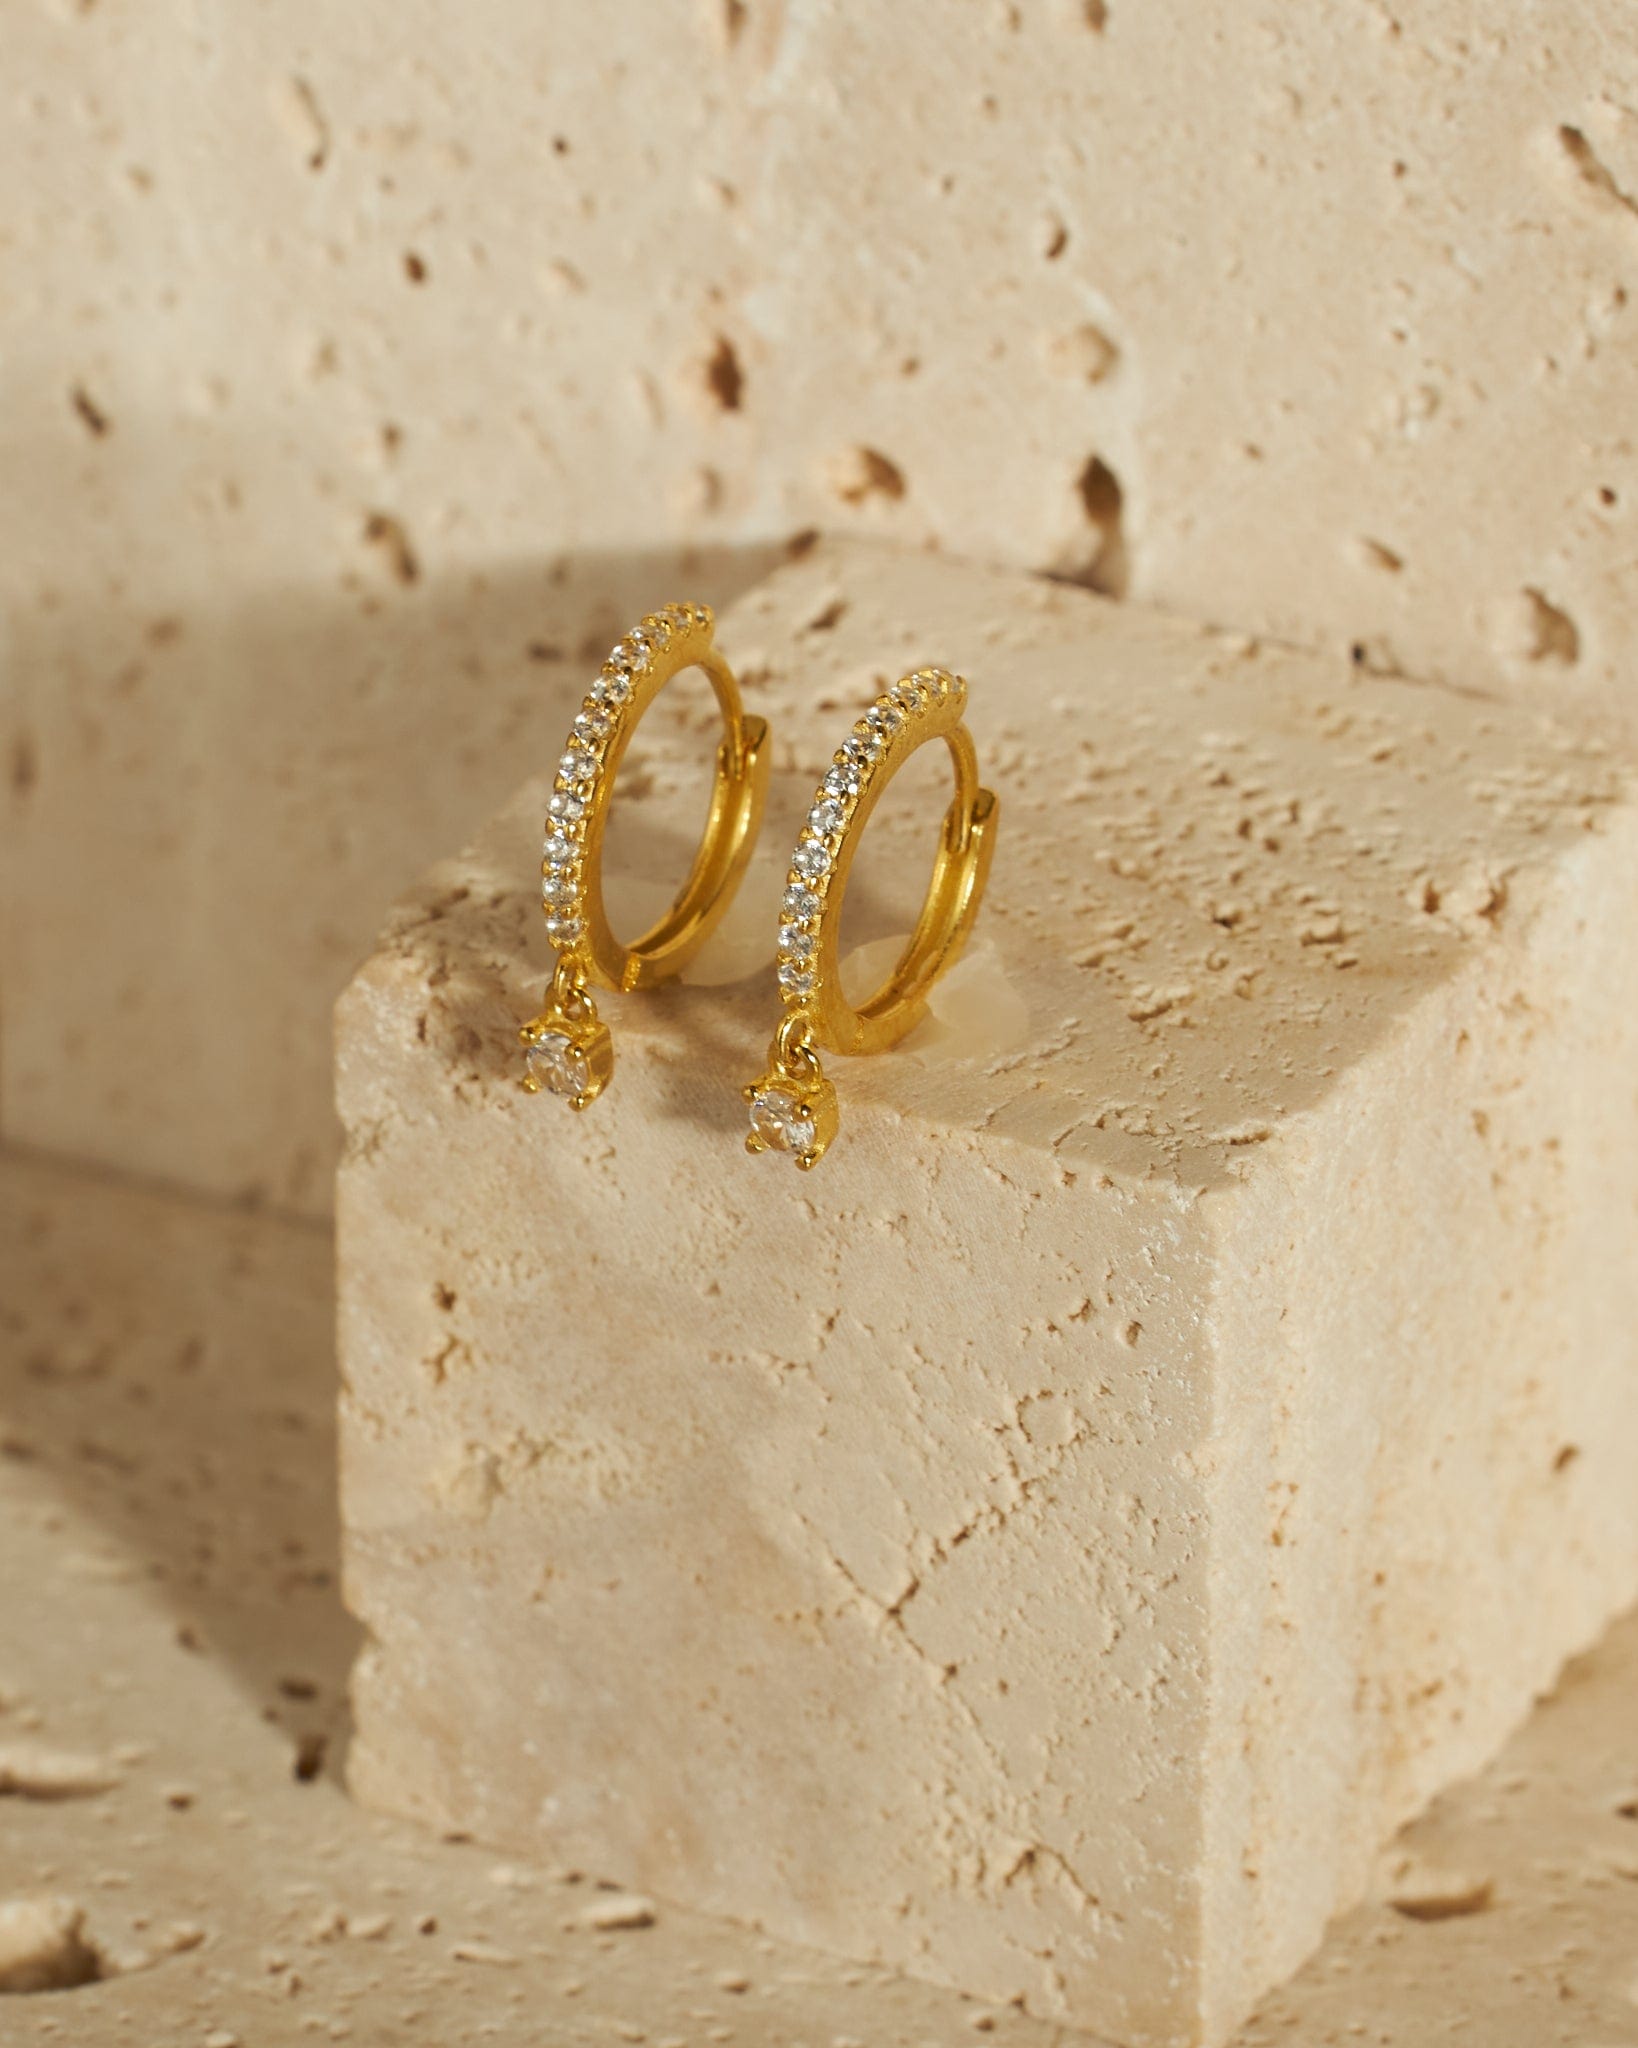 A pair of crystal-encrusted Bellagio Drop Hoop earrings sits atop a stone block, the larger crystal pendants dangling gracefully from the bottom of each hoop.